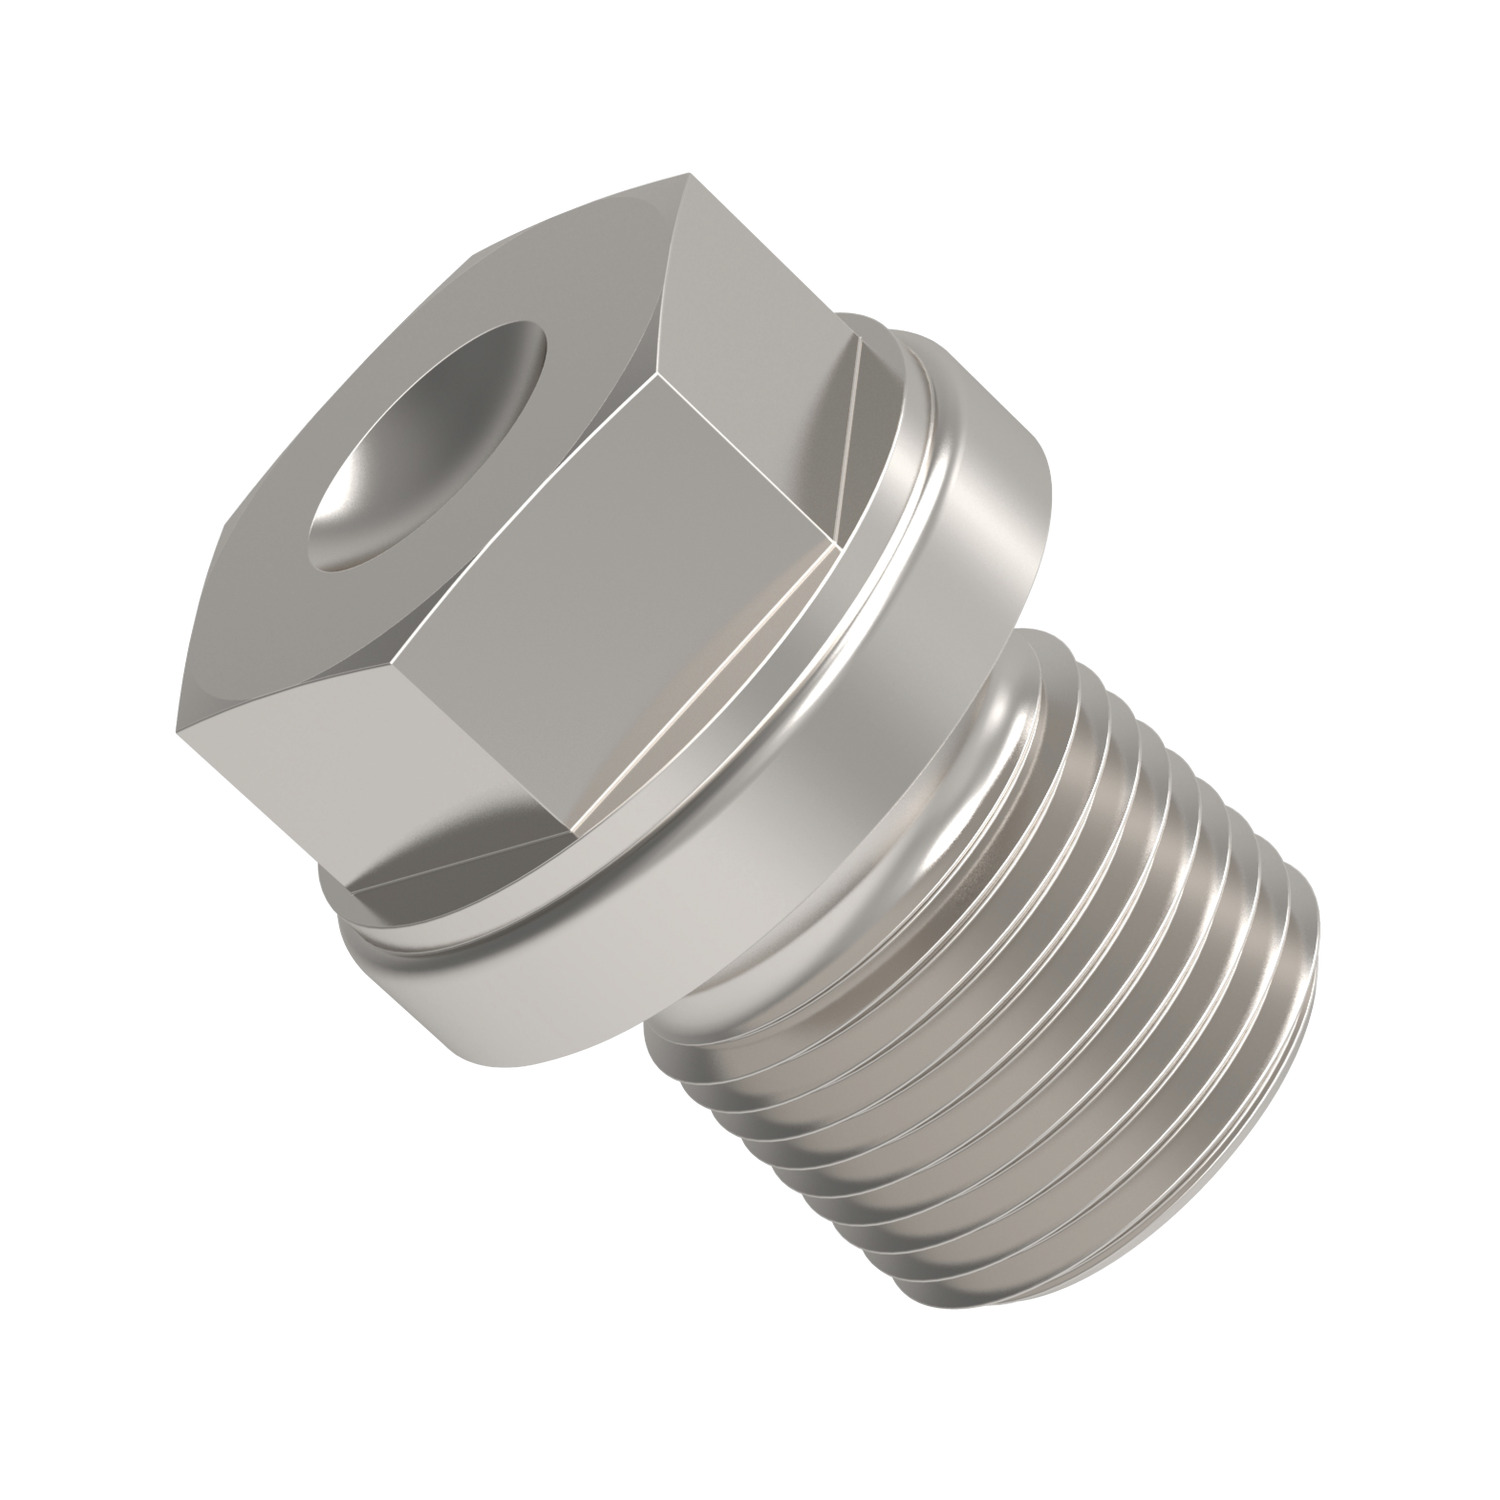 Blanking Plugs Heavy Duty Blanking plugs, heavy duty for metric or BSP (british standard pipe threads). In stainless, steel and brass. To DIN 910.